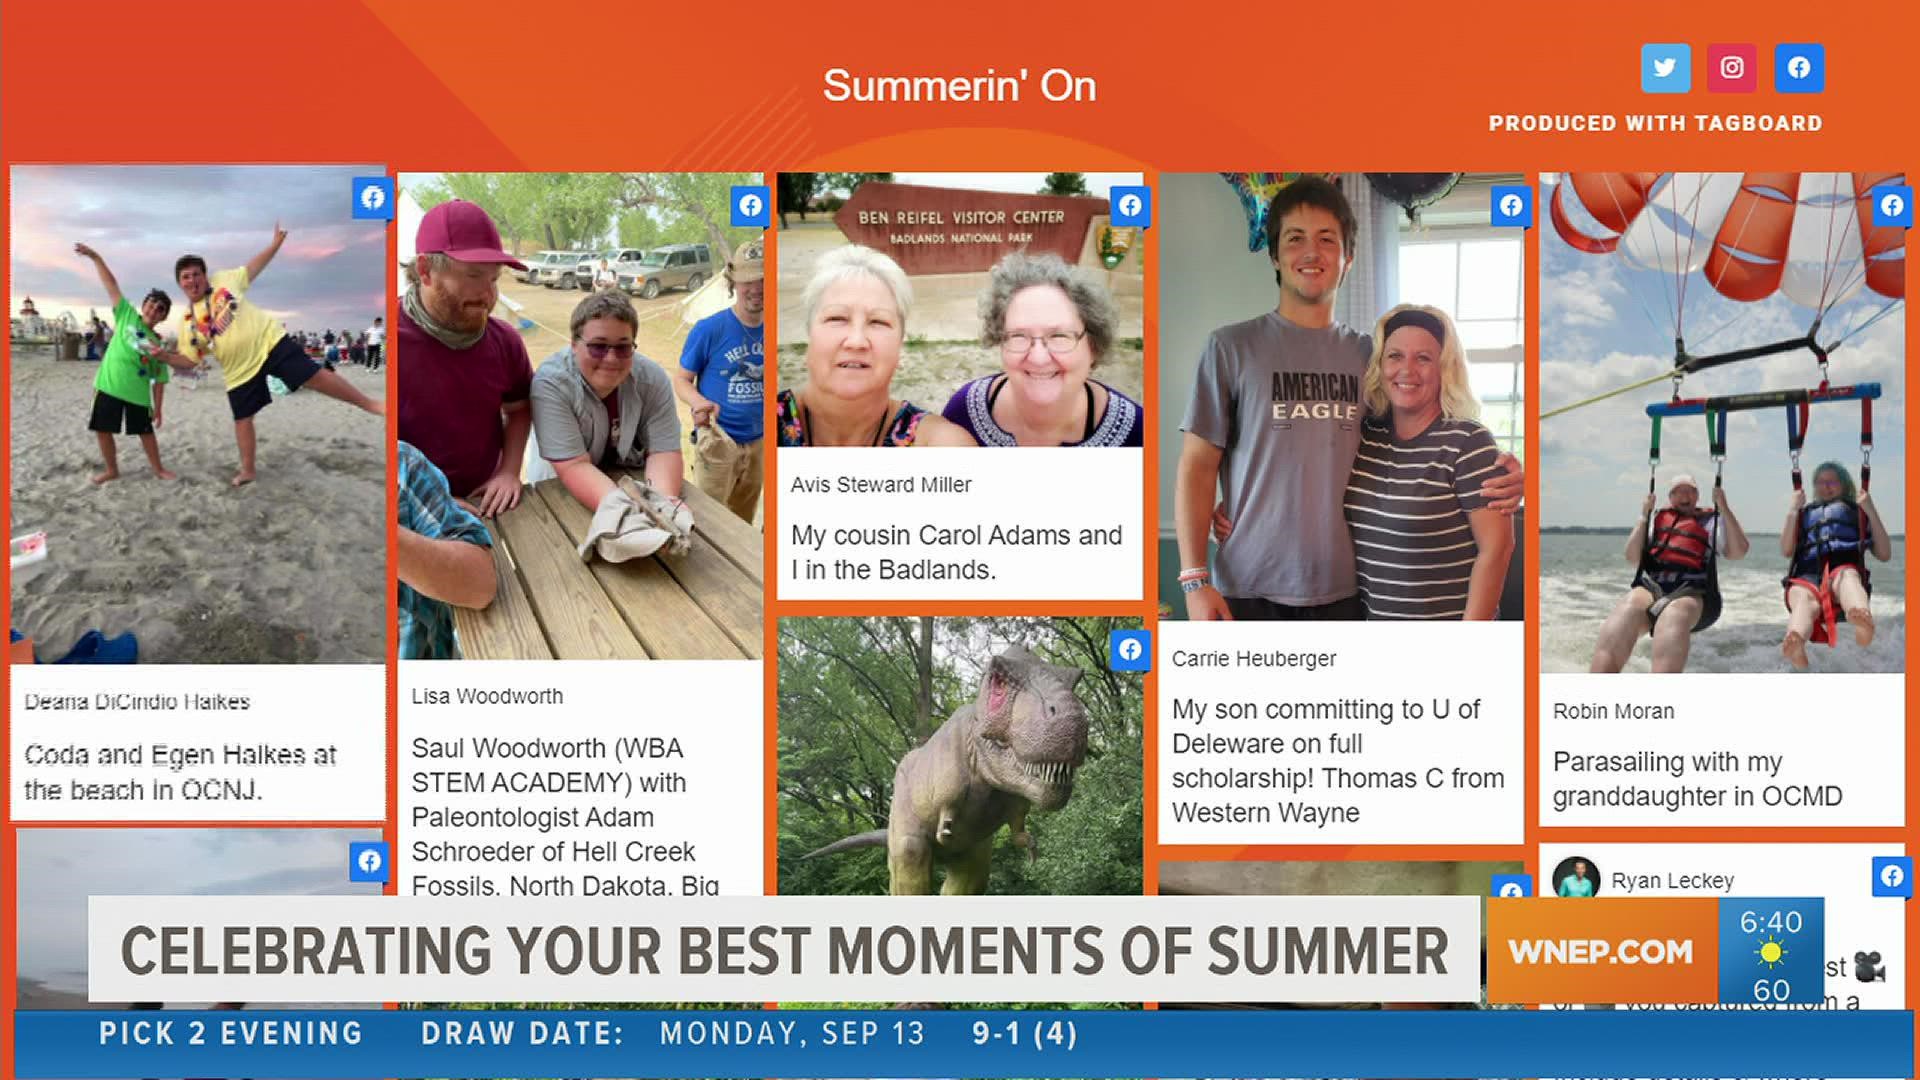 Newswatch 16 wanted to take a moment to share some of your amazing summer moments captured on camera.